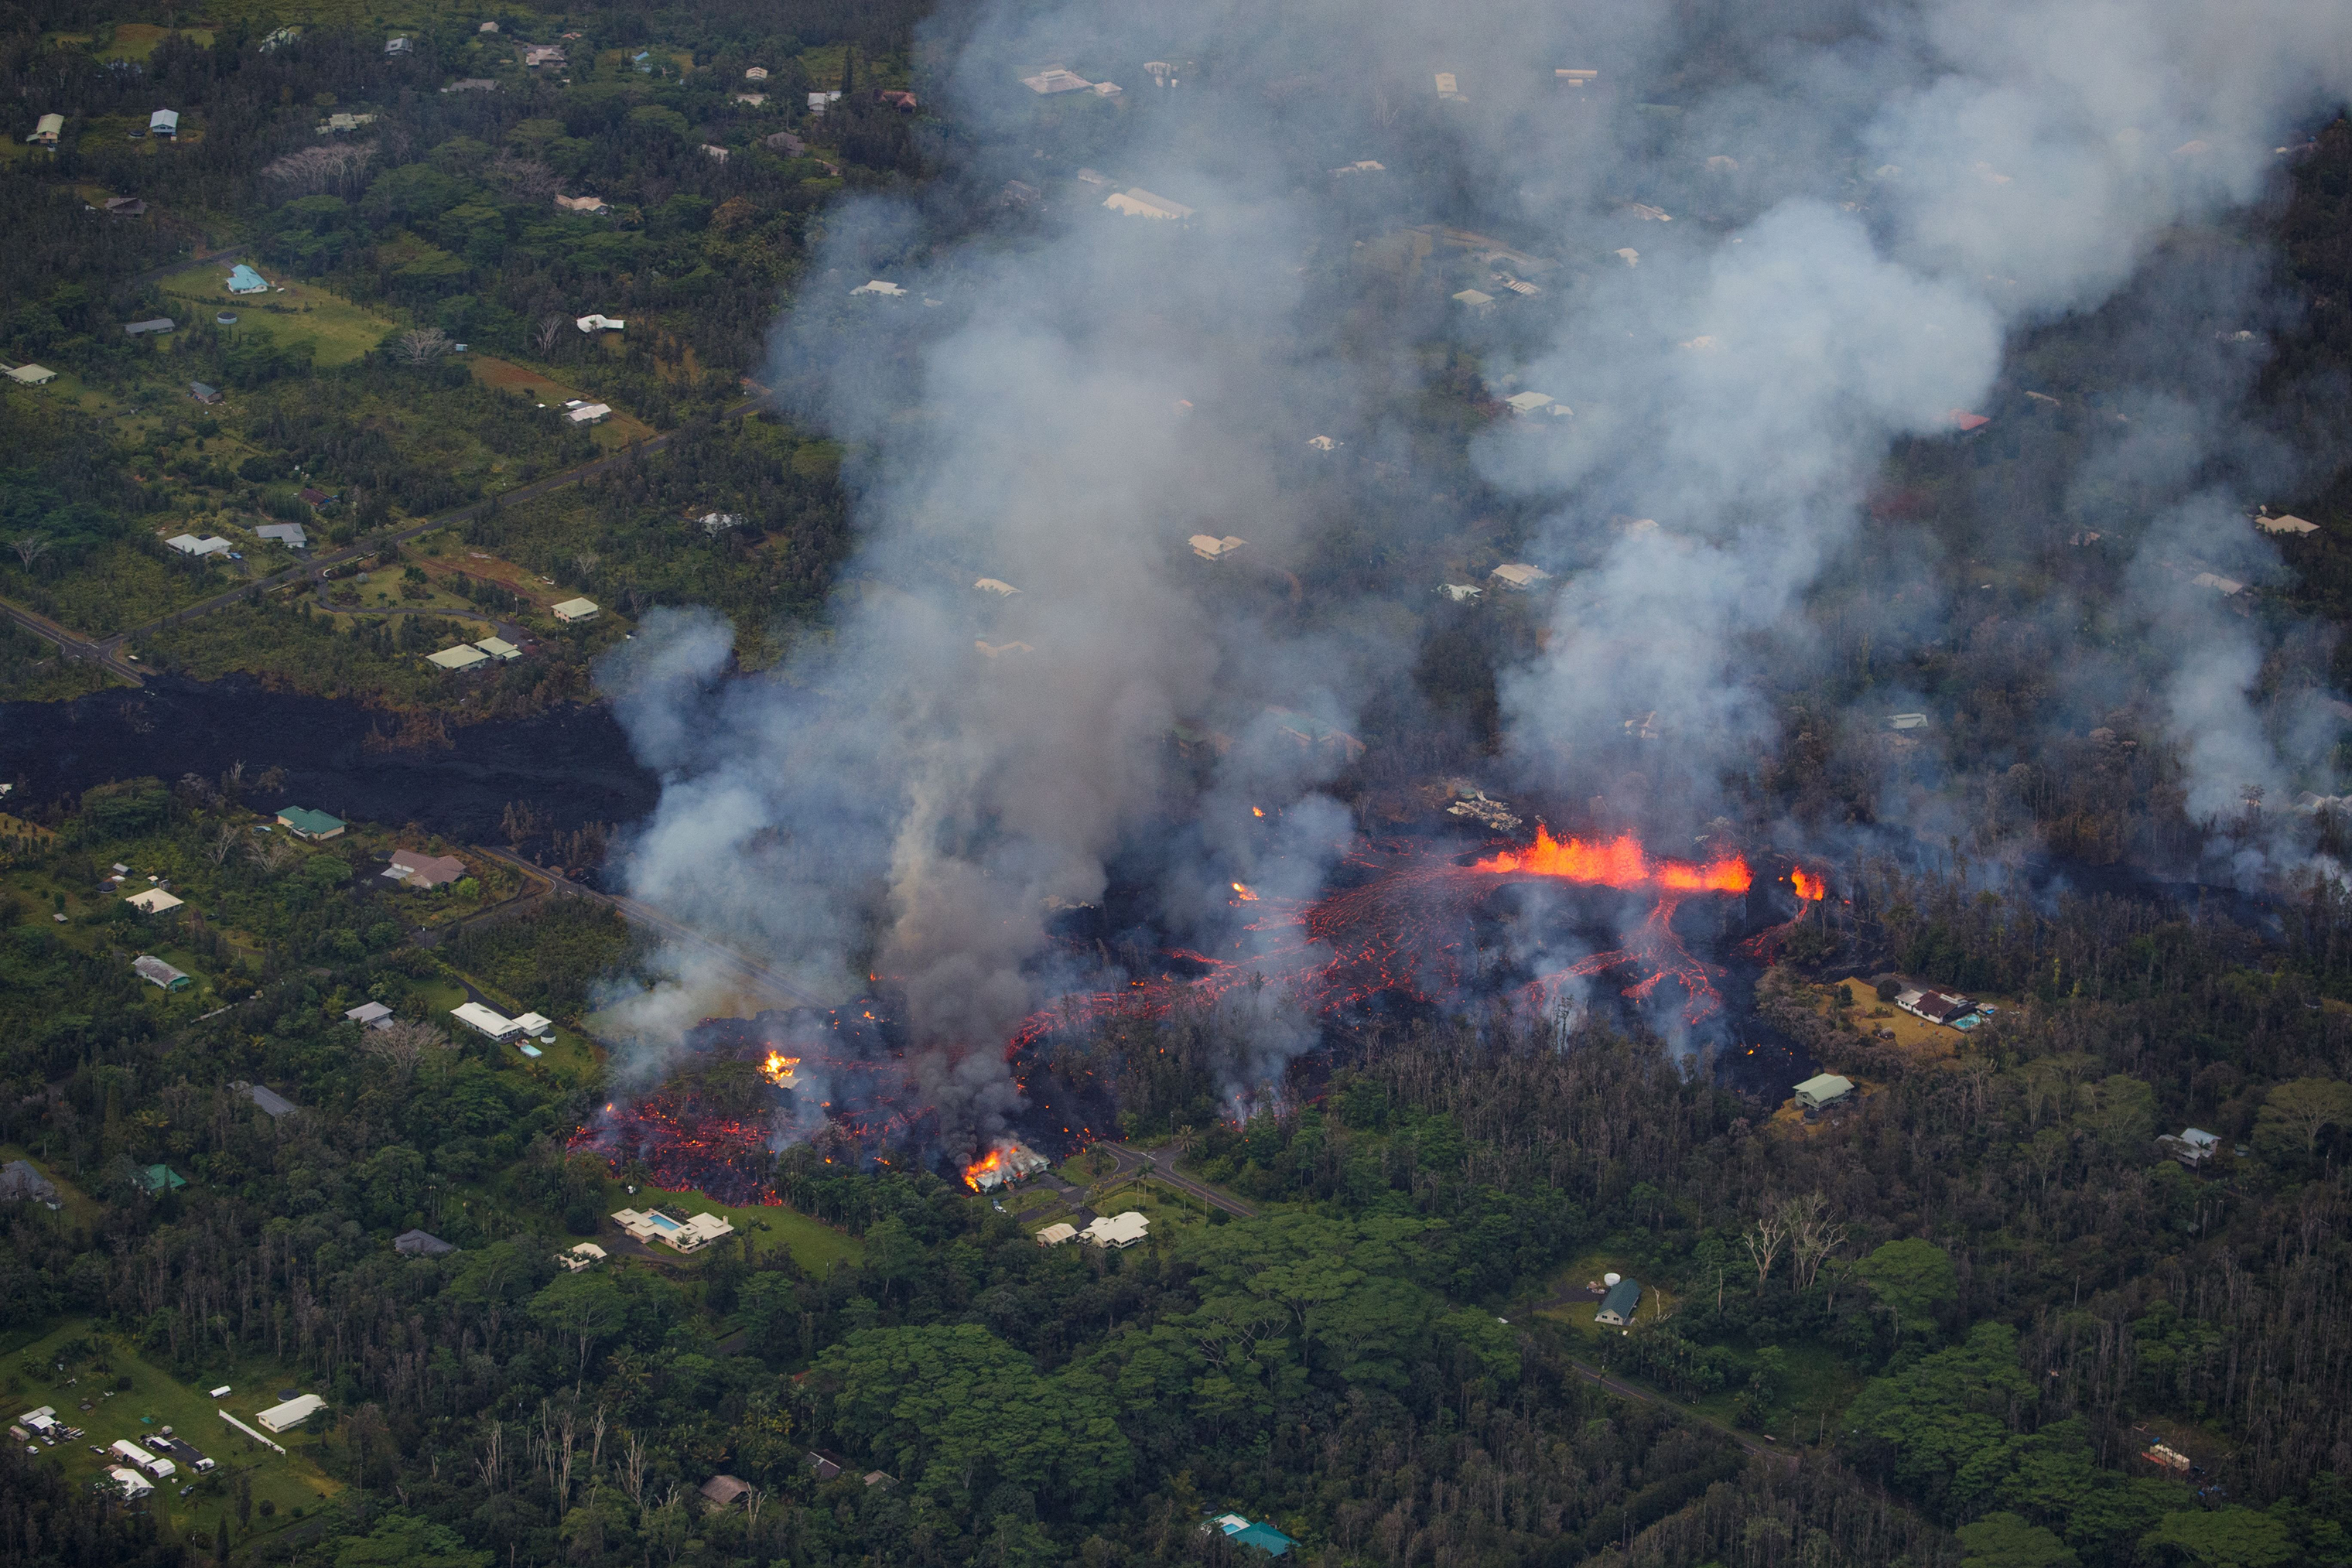 At least 26 homes were burned during the latest volcanic activity. (Bruce Omori—Paradise Helicopters/EPA-EFE/Shutterstock)